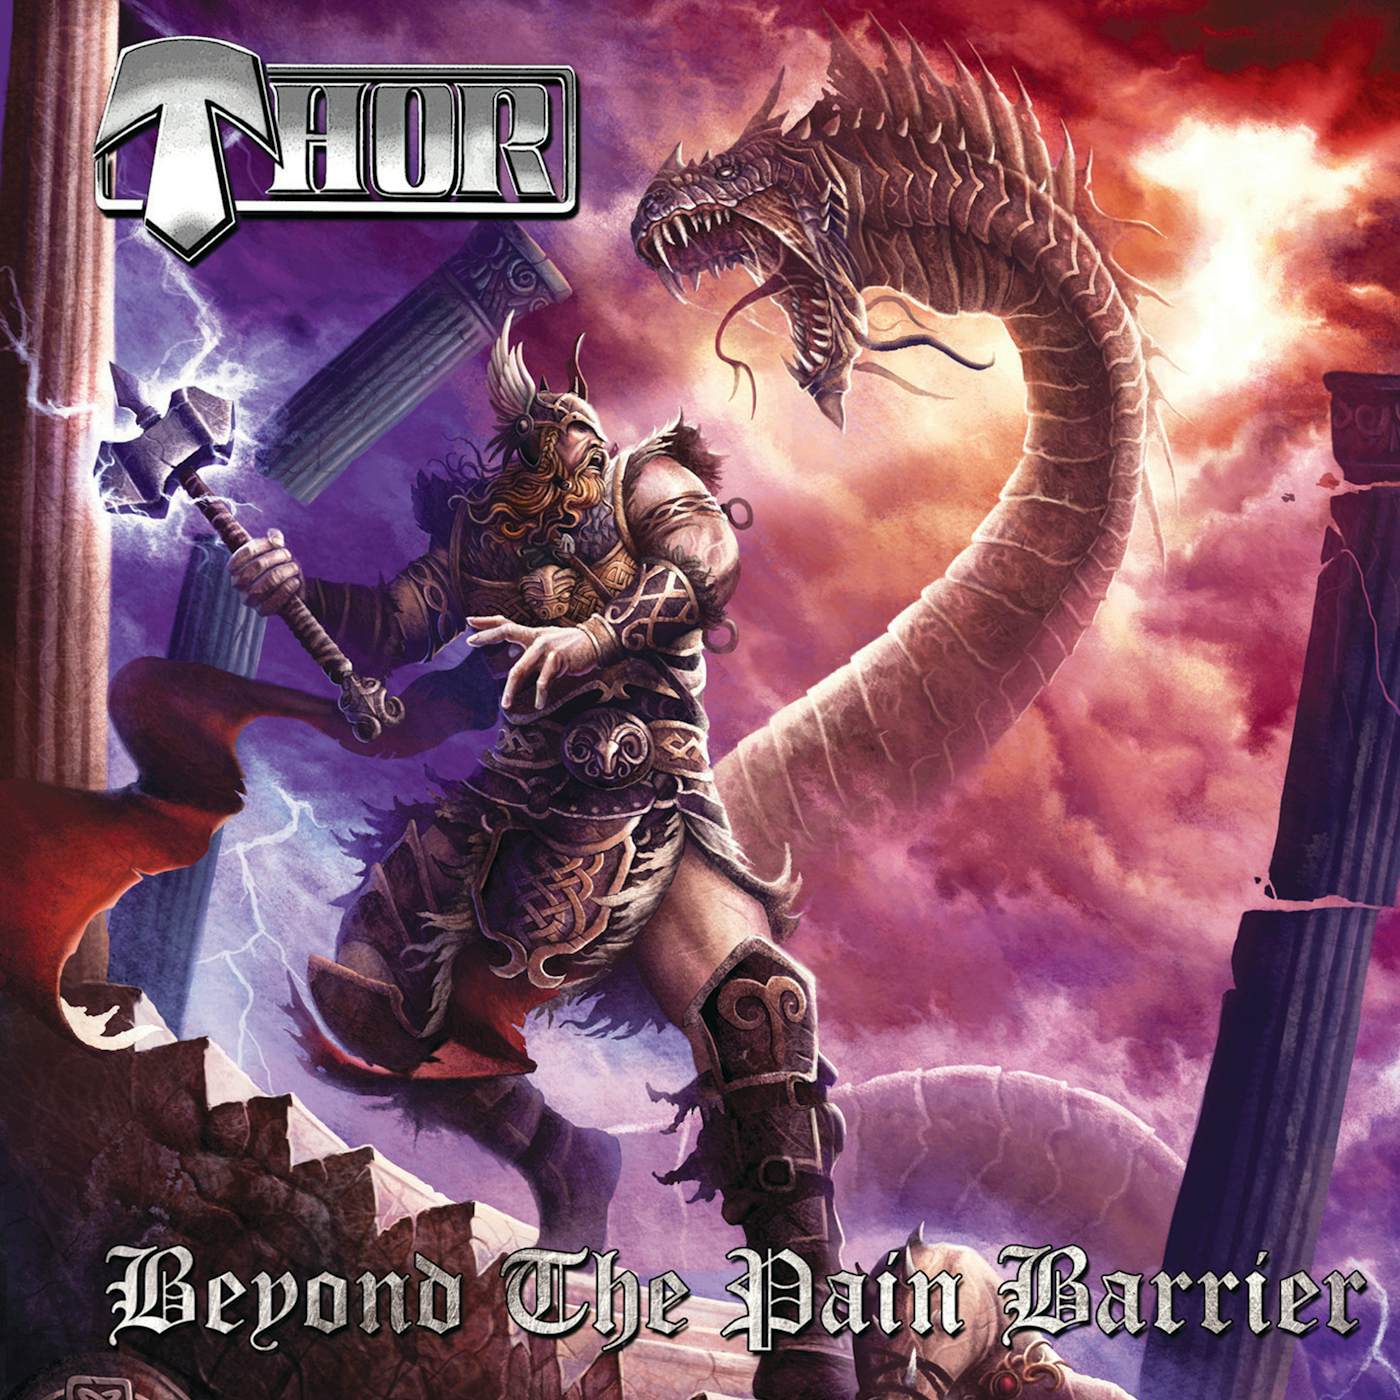 Thor BEYOND THE PAIN BARRIER CD